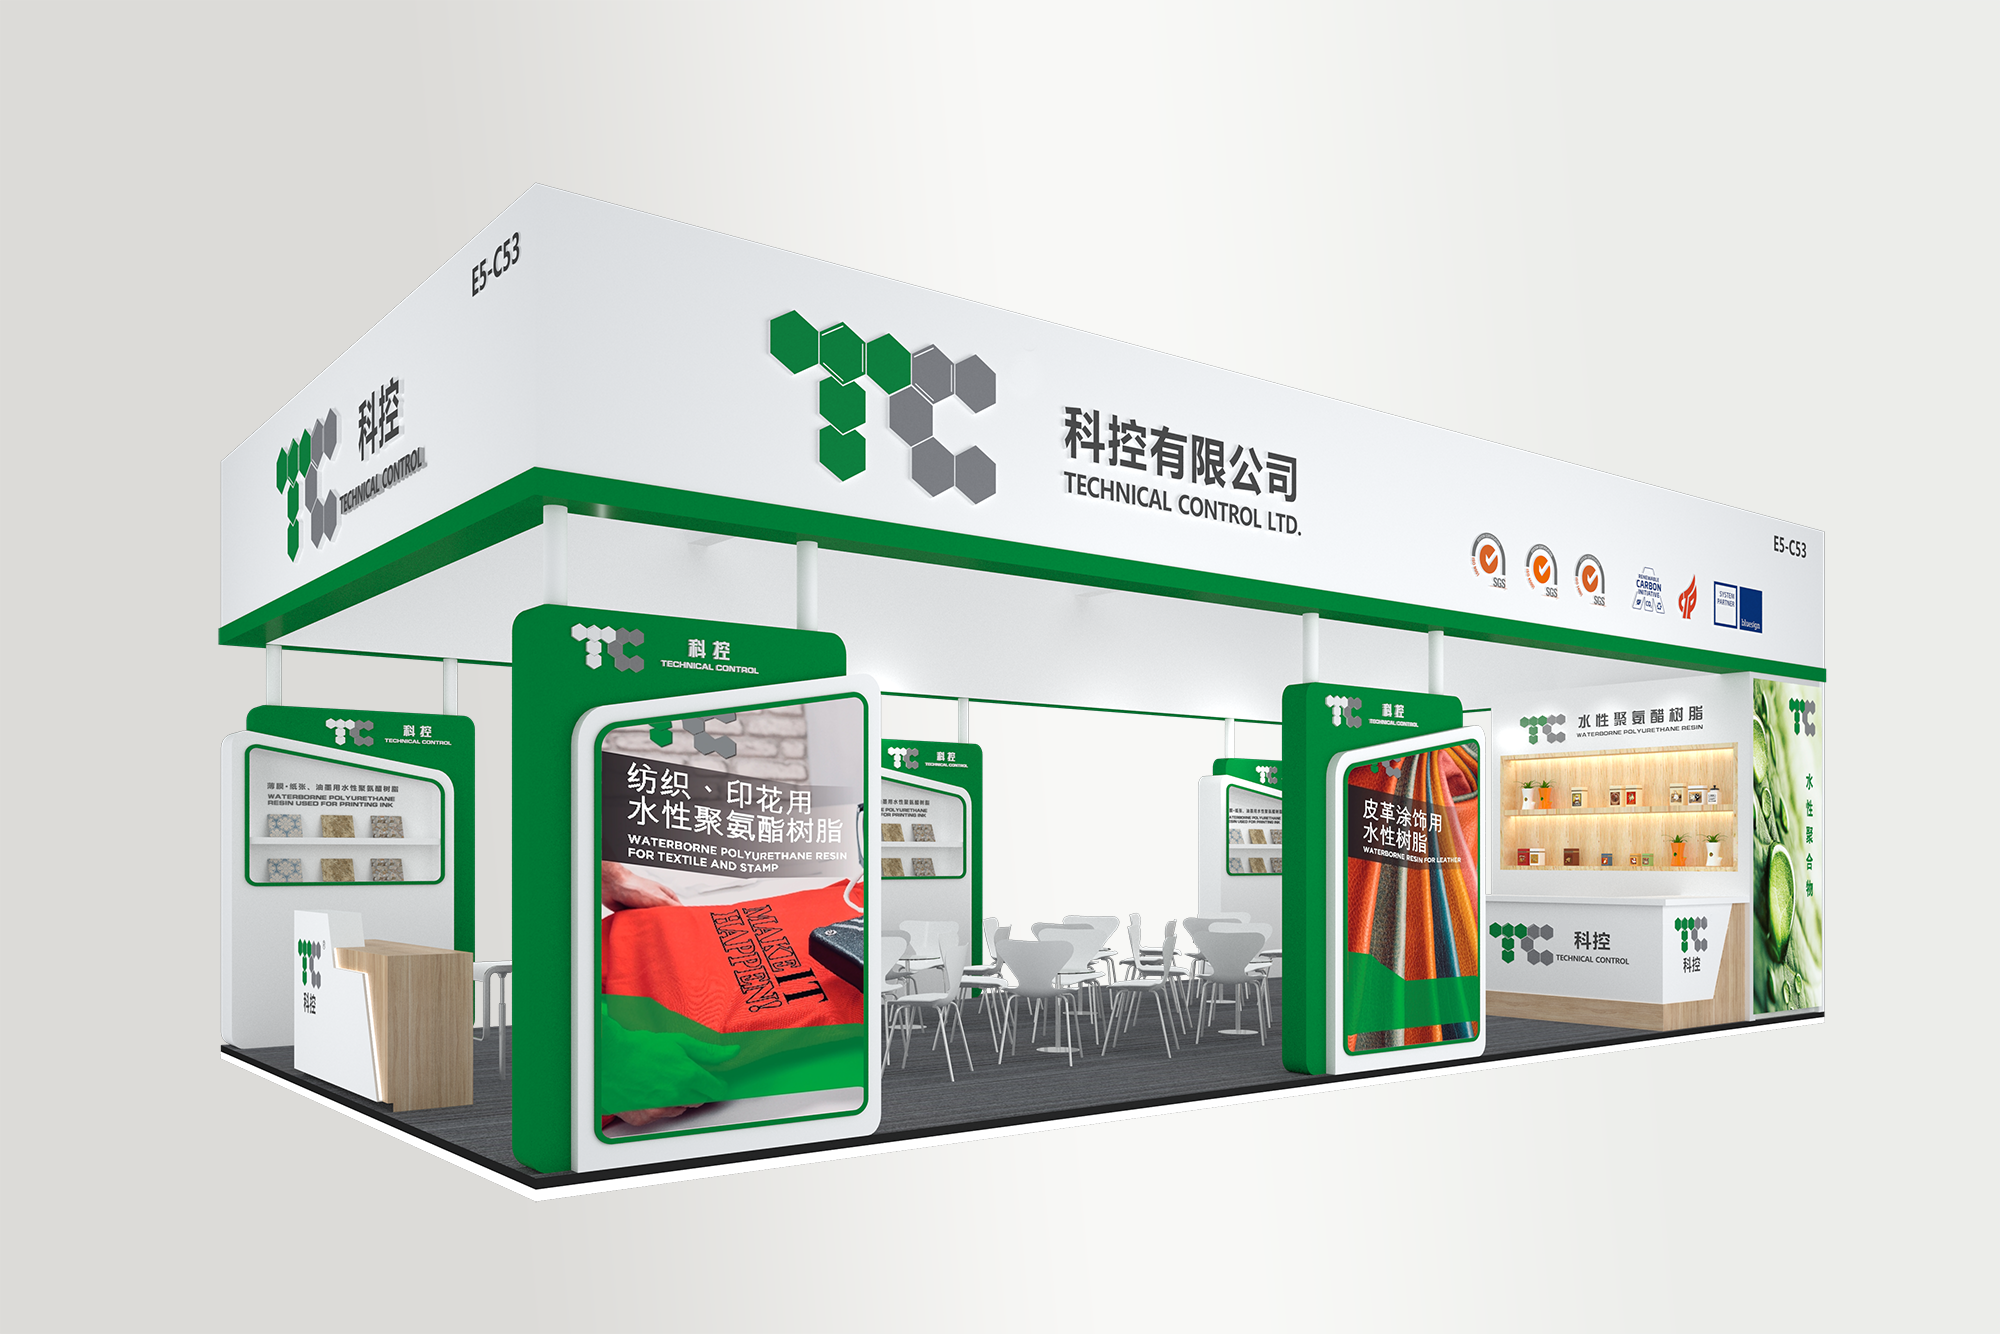 【INVITATION】Technical Control Invites You to Visit CHINACOAT